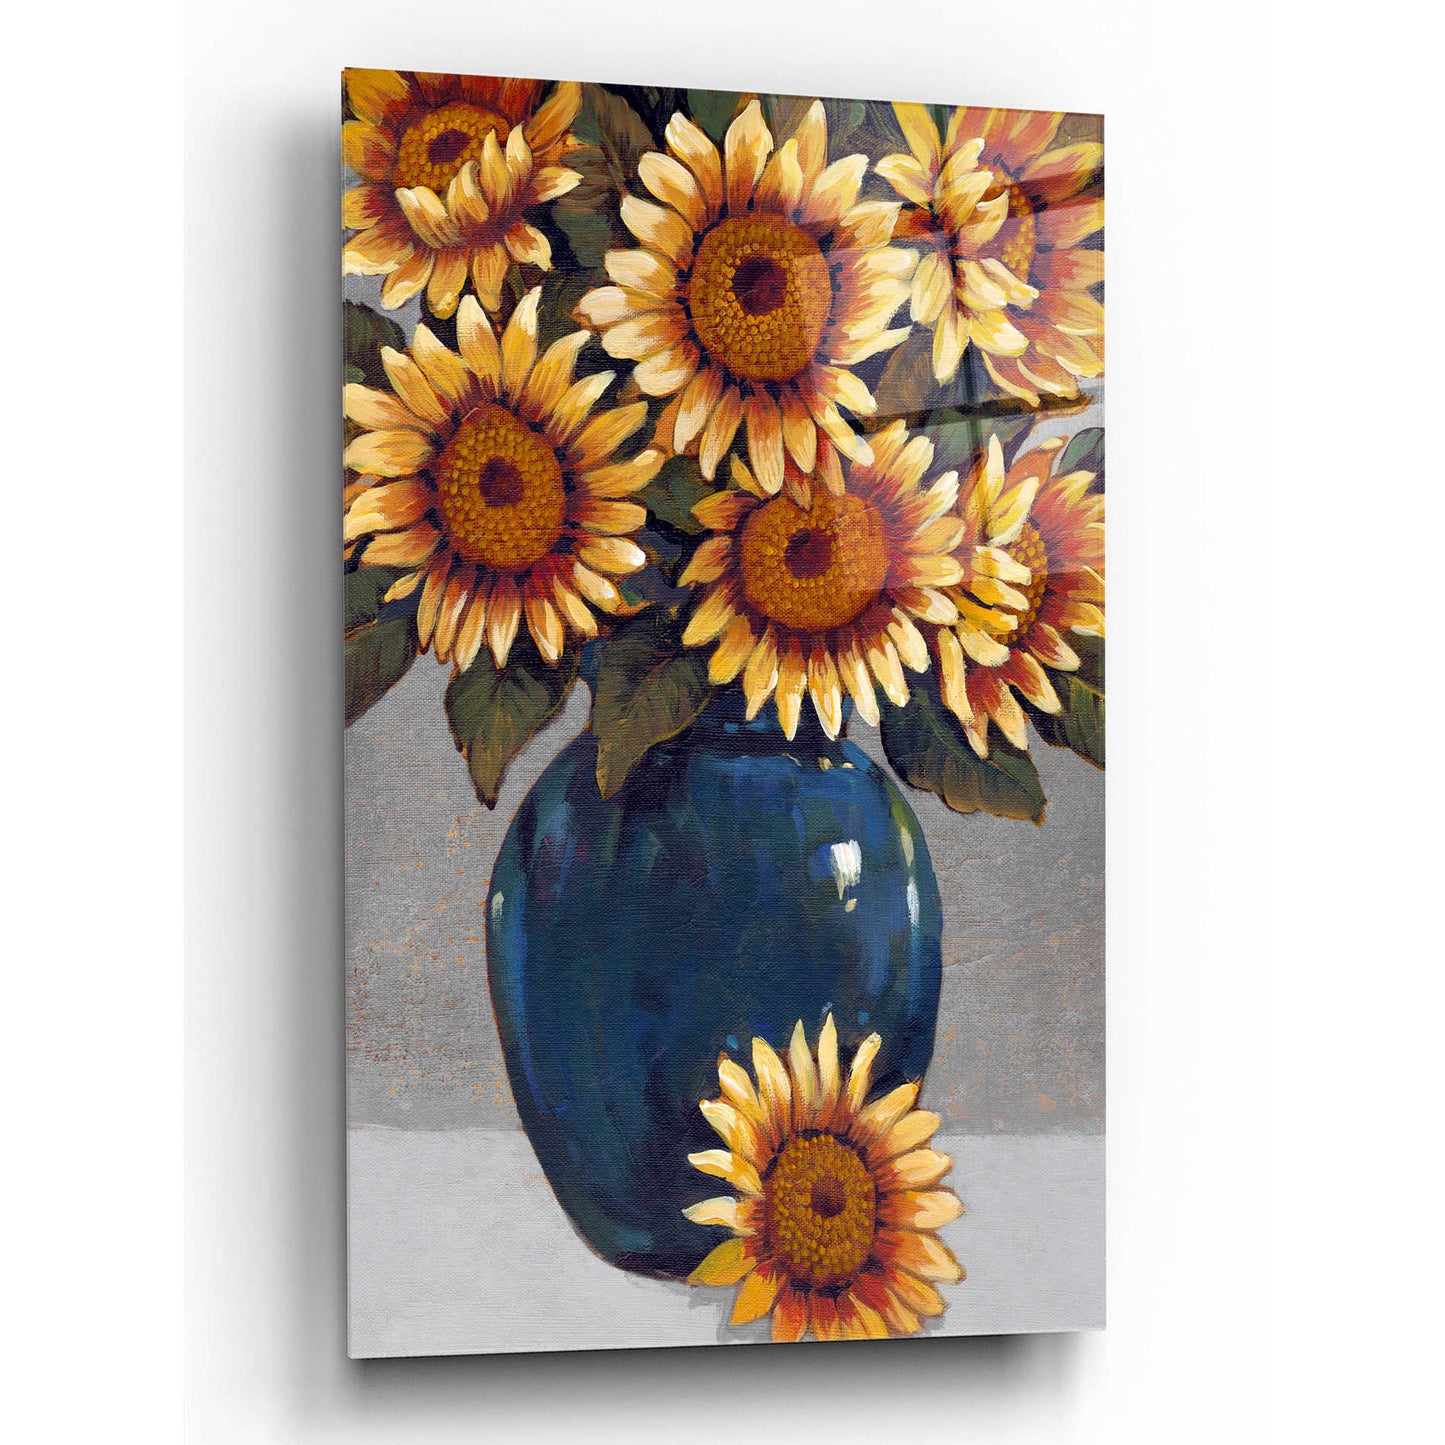 Epic Art 'Vase of Sunflowers I' by Tim O'Toole, Acrylic Glass Wall Art,12x16